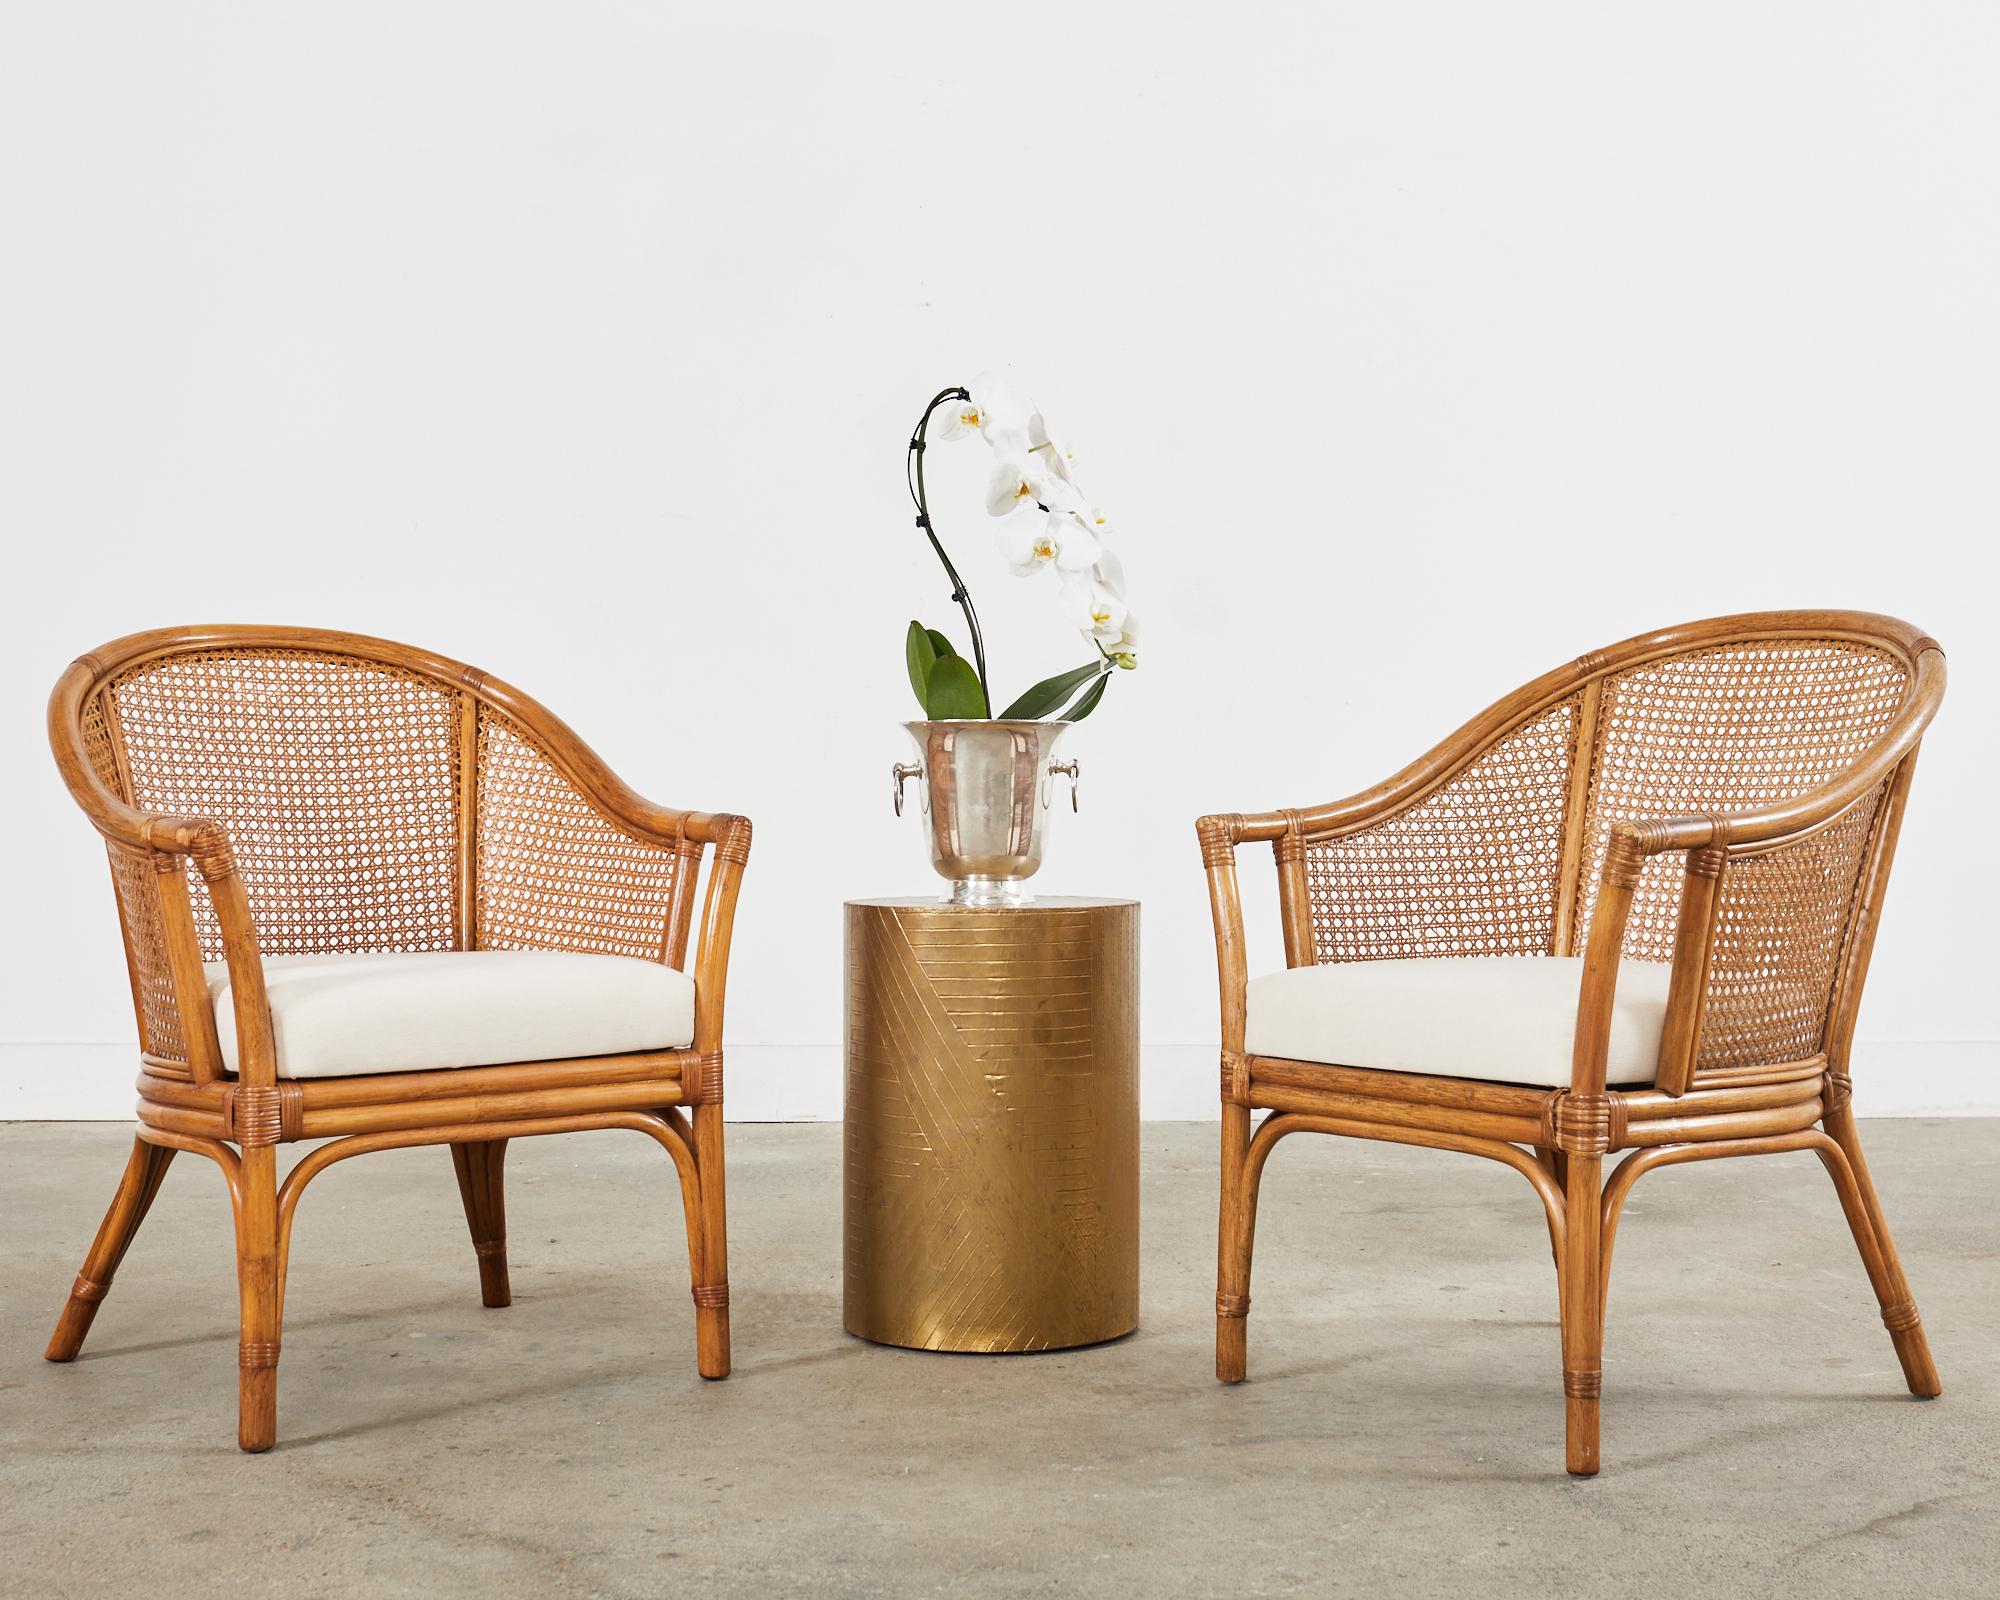 Mid-century modern pair of rattan barrel back armchairs made in the organic modern manner and style of McGuire. The chairs feature a horseshoe shaped crest inset with woven cane on the back and sides. The seats have a thick cushion measuring 24